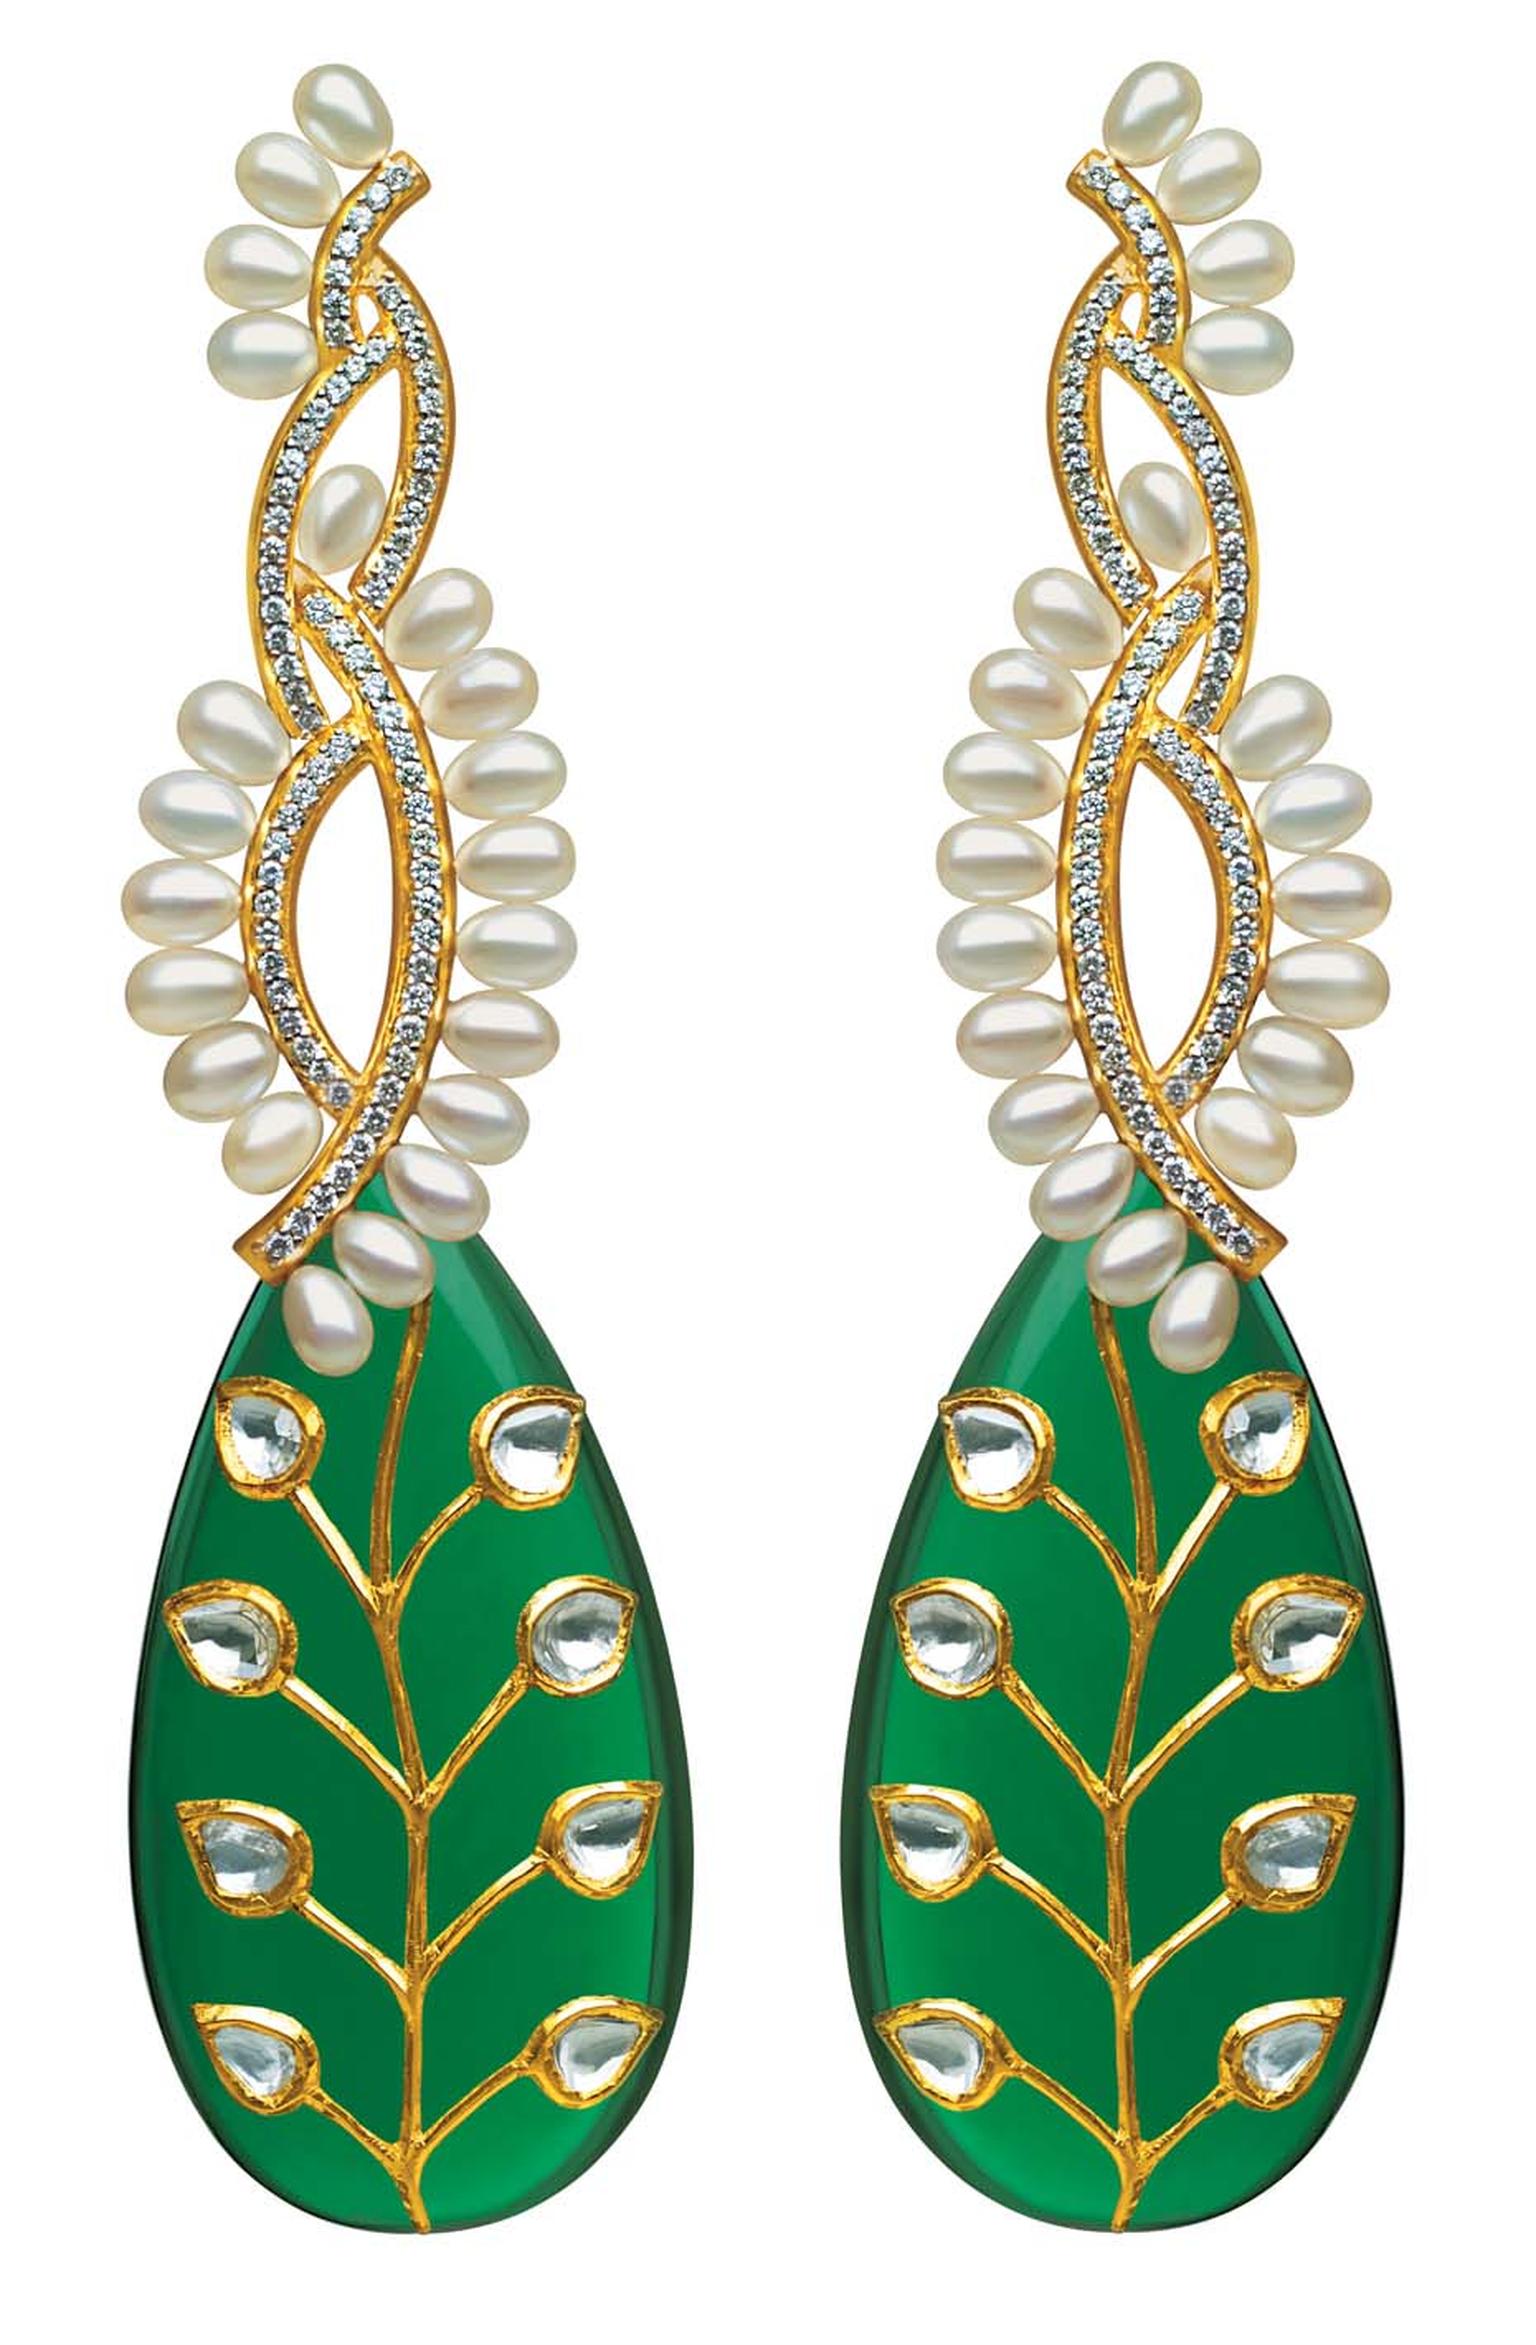 MINAWALA Festival of Emeralds collection necklace in yellow gold with diamonds, pearls and green quartz